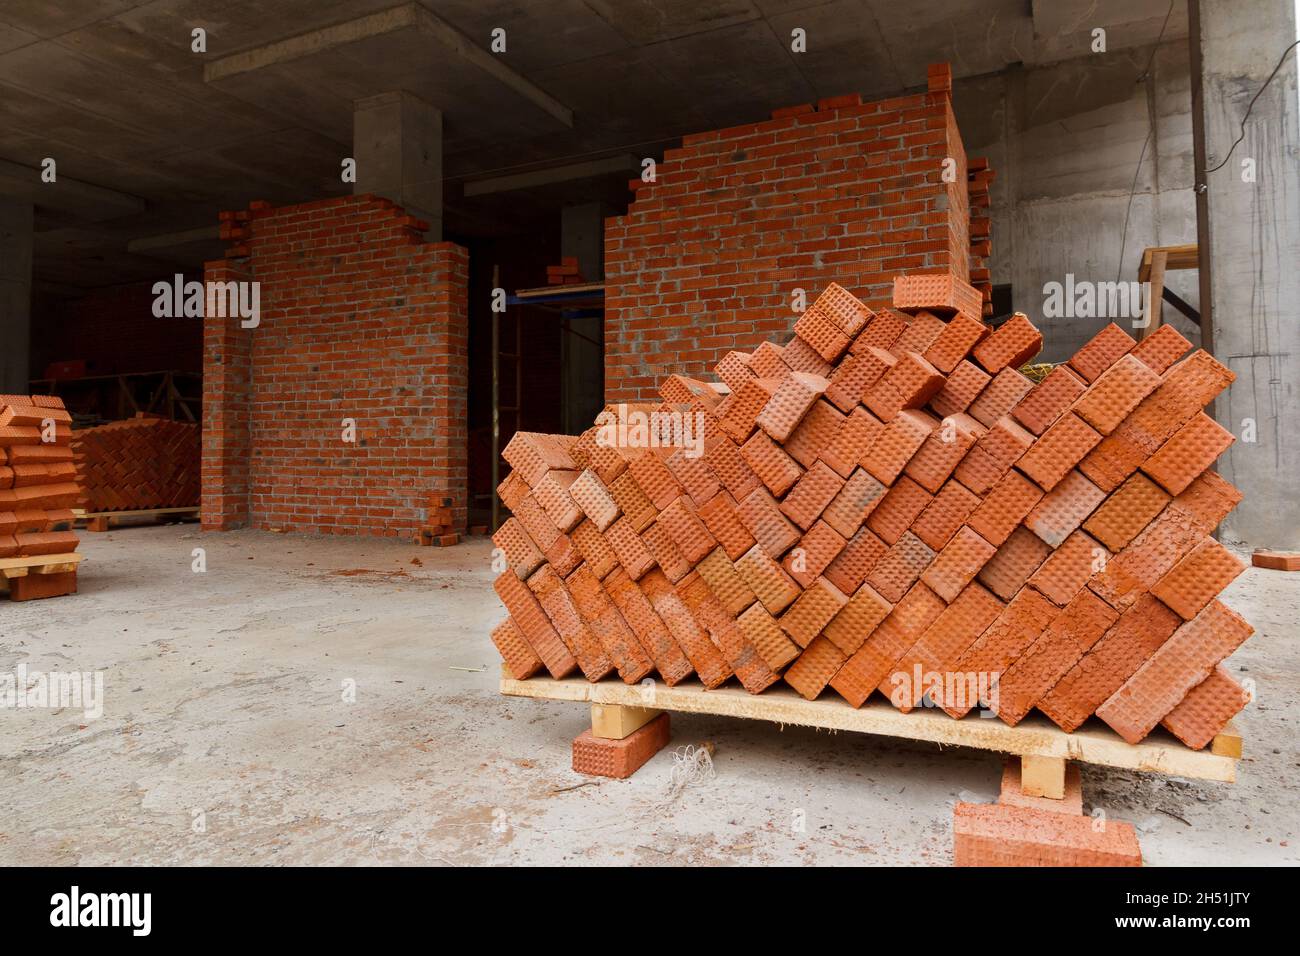 Red building bricks. Brick on a pallet at a construction site. Building material for the construction of walls and partitions in the building. Stock Photo